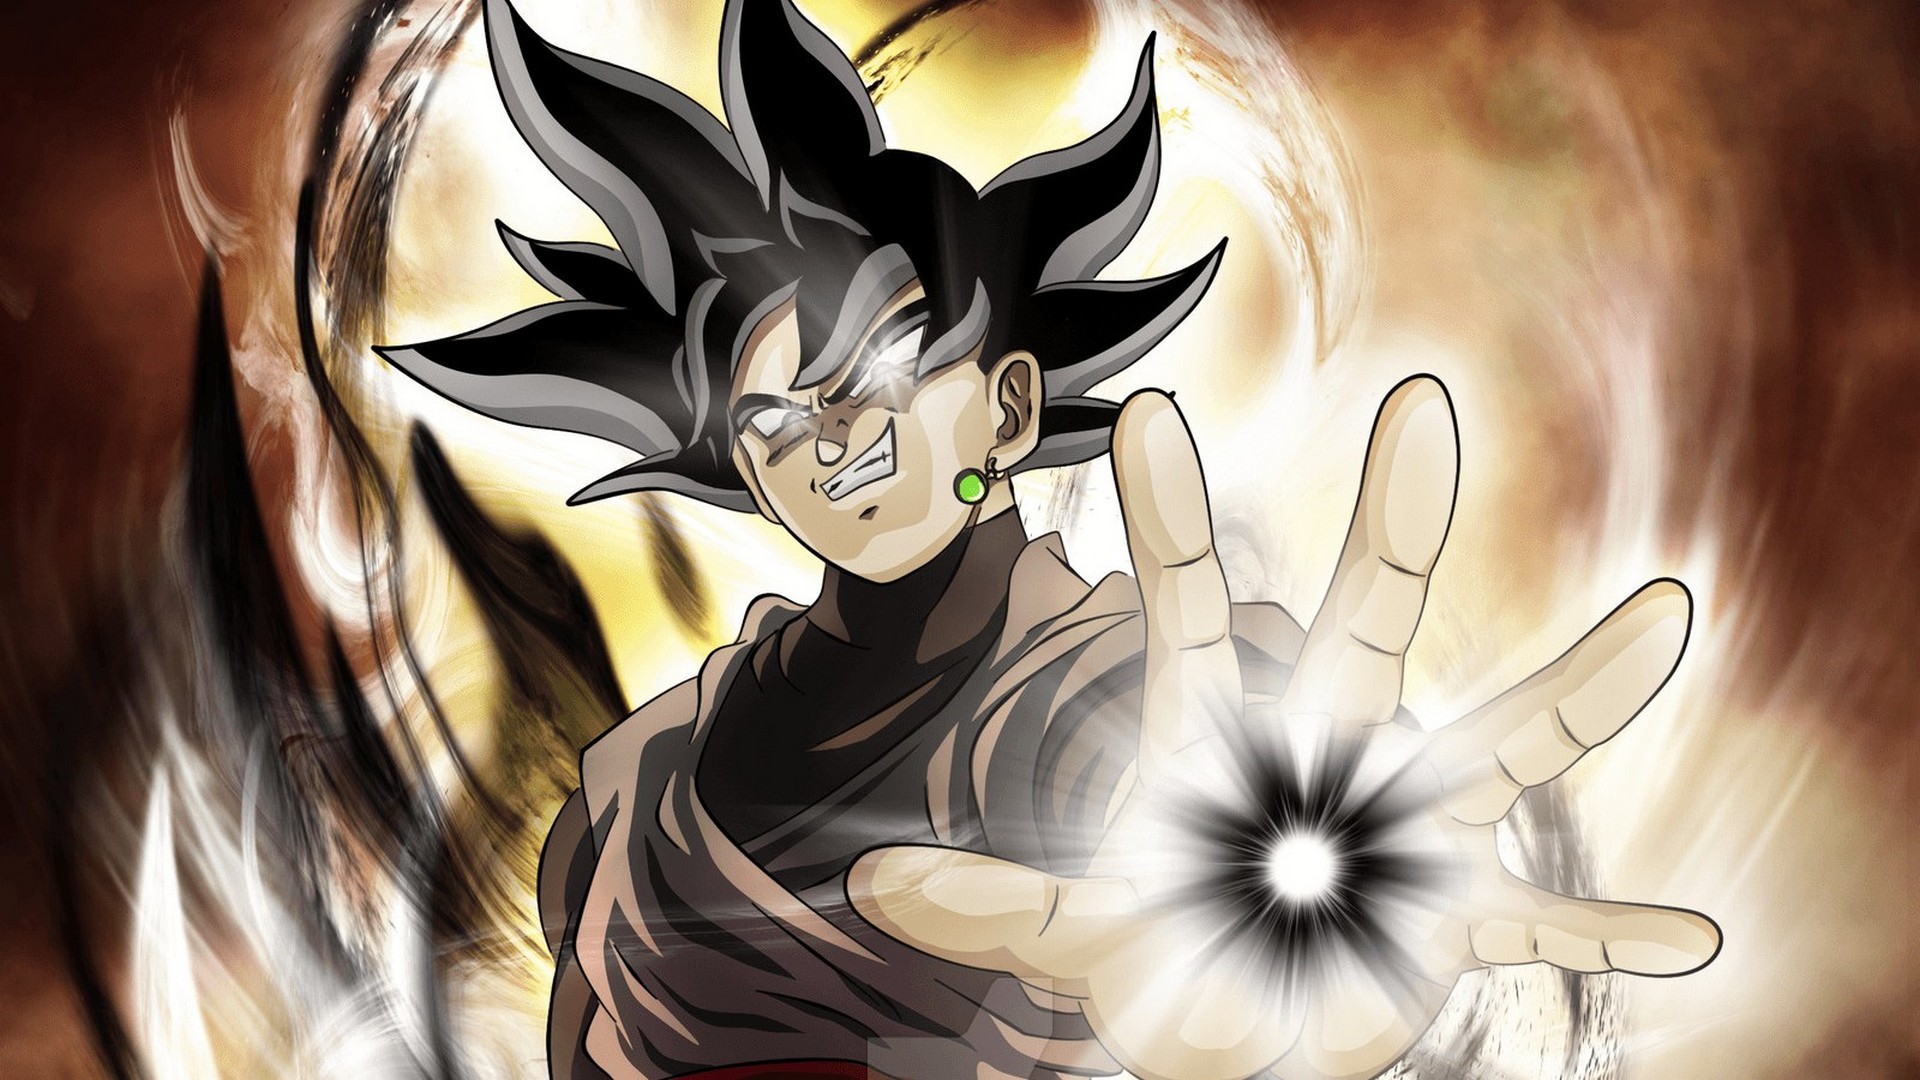 Desktop Wallpaper Black Goku with image resolution 1920x1080 pixel. You can use this wallpaper as background for your desktop Computer Screensavers, Android or iPhone smartphones